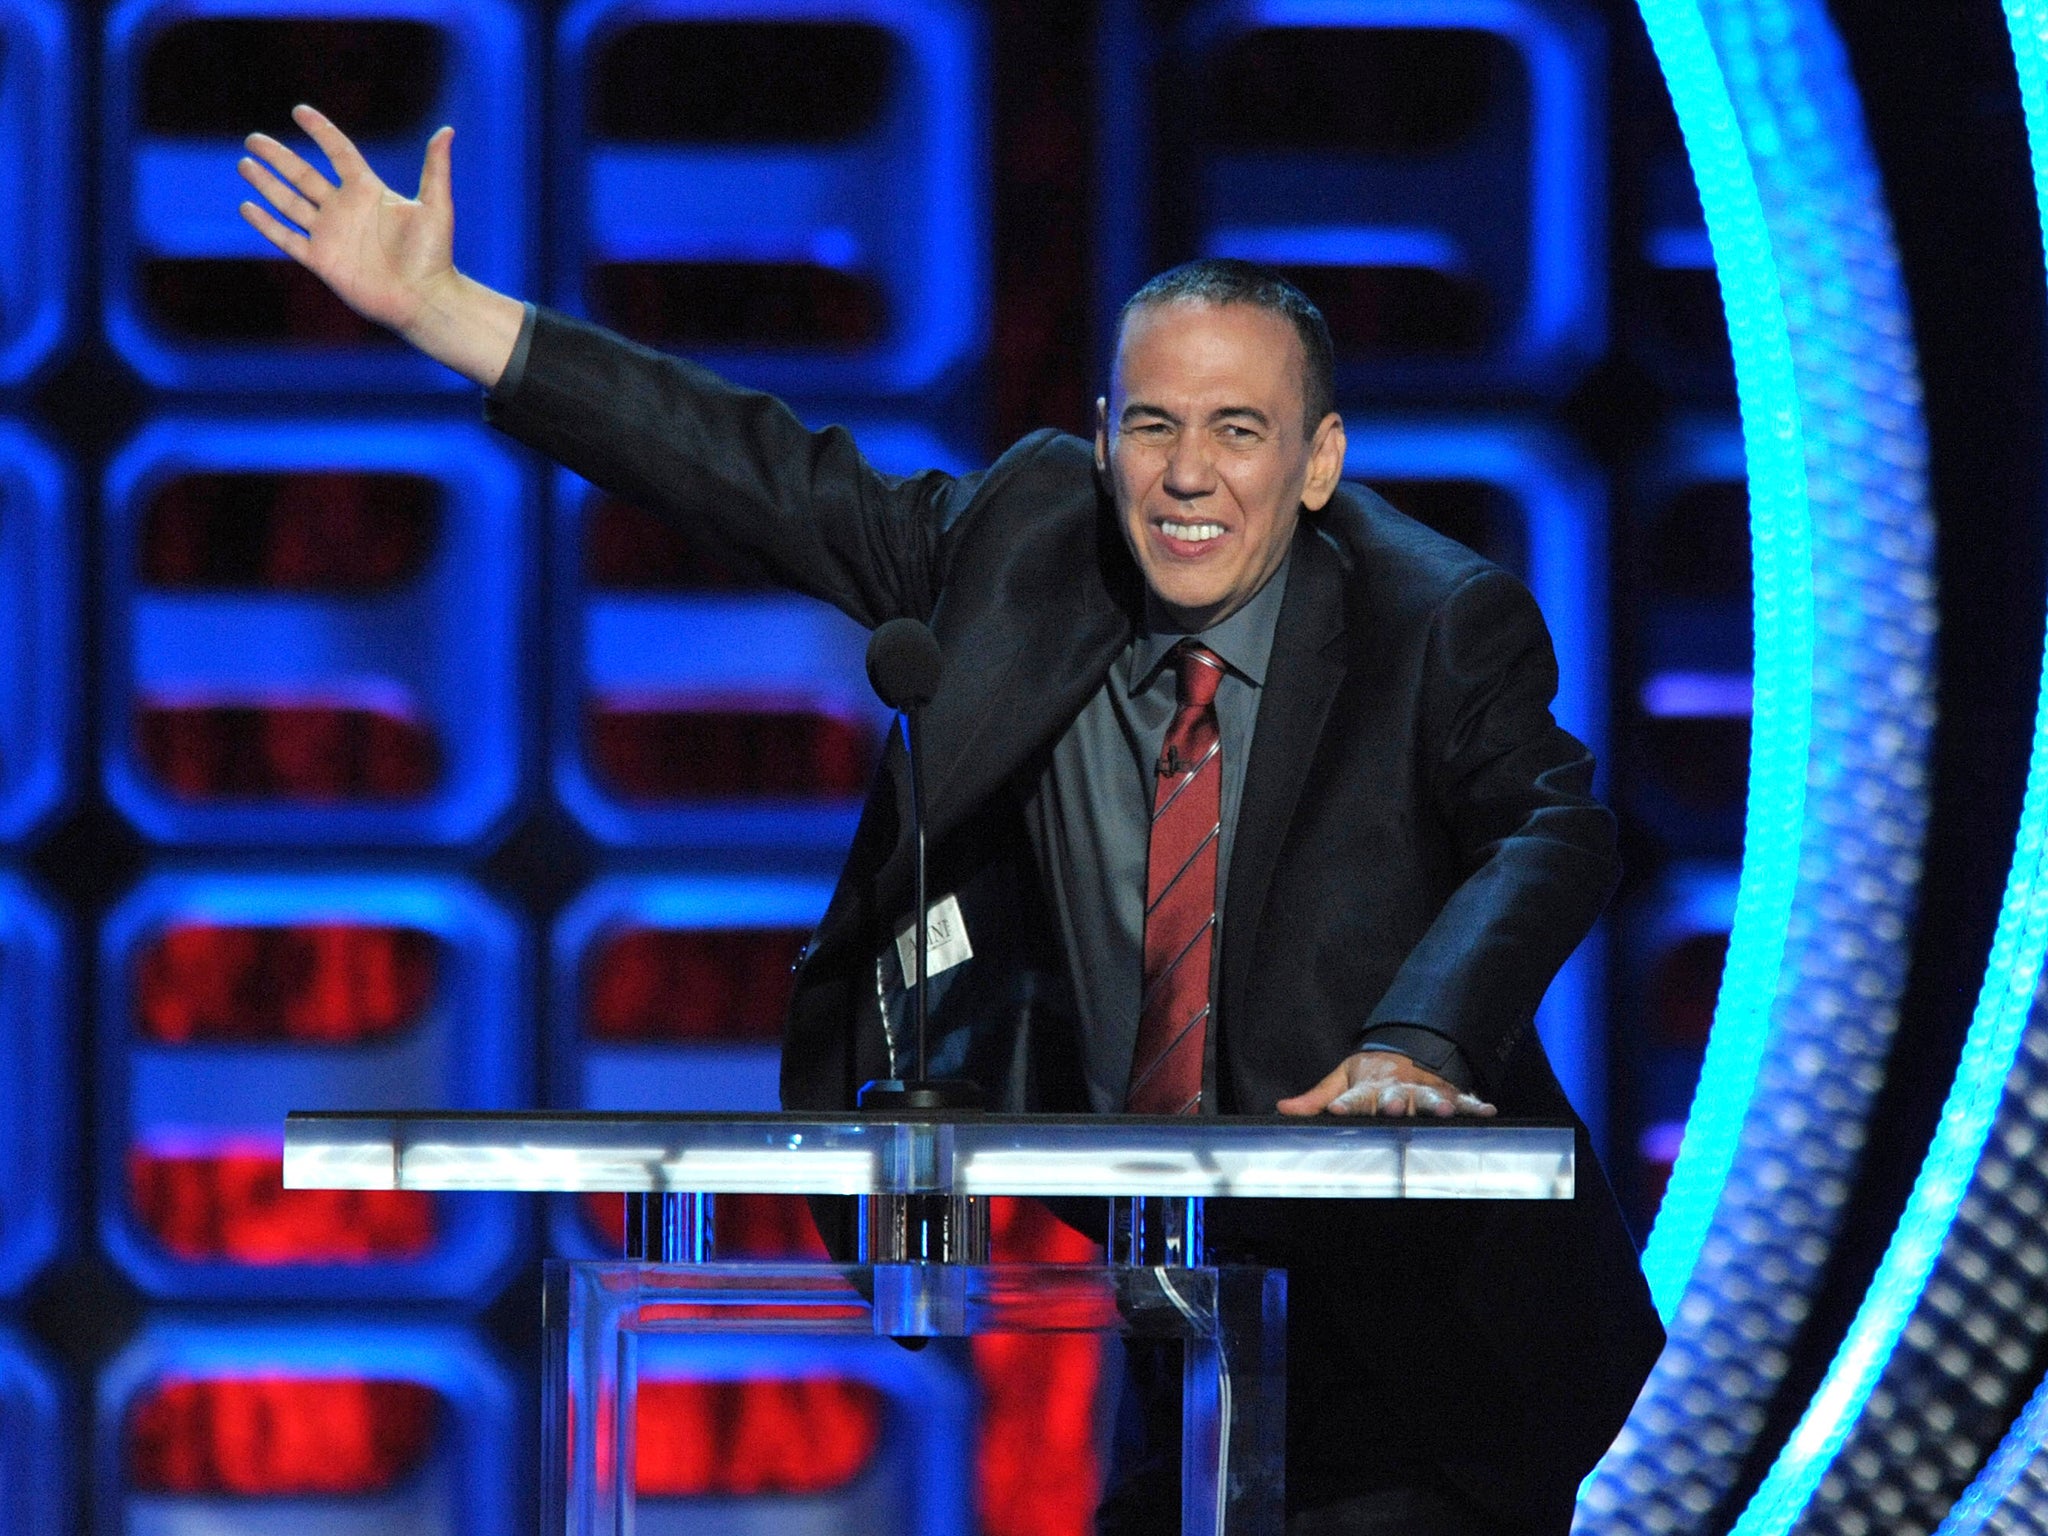 Performing at a roast of comedian Roseanne for Comedy Central, in 2012